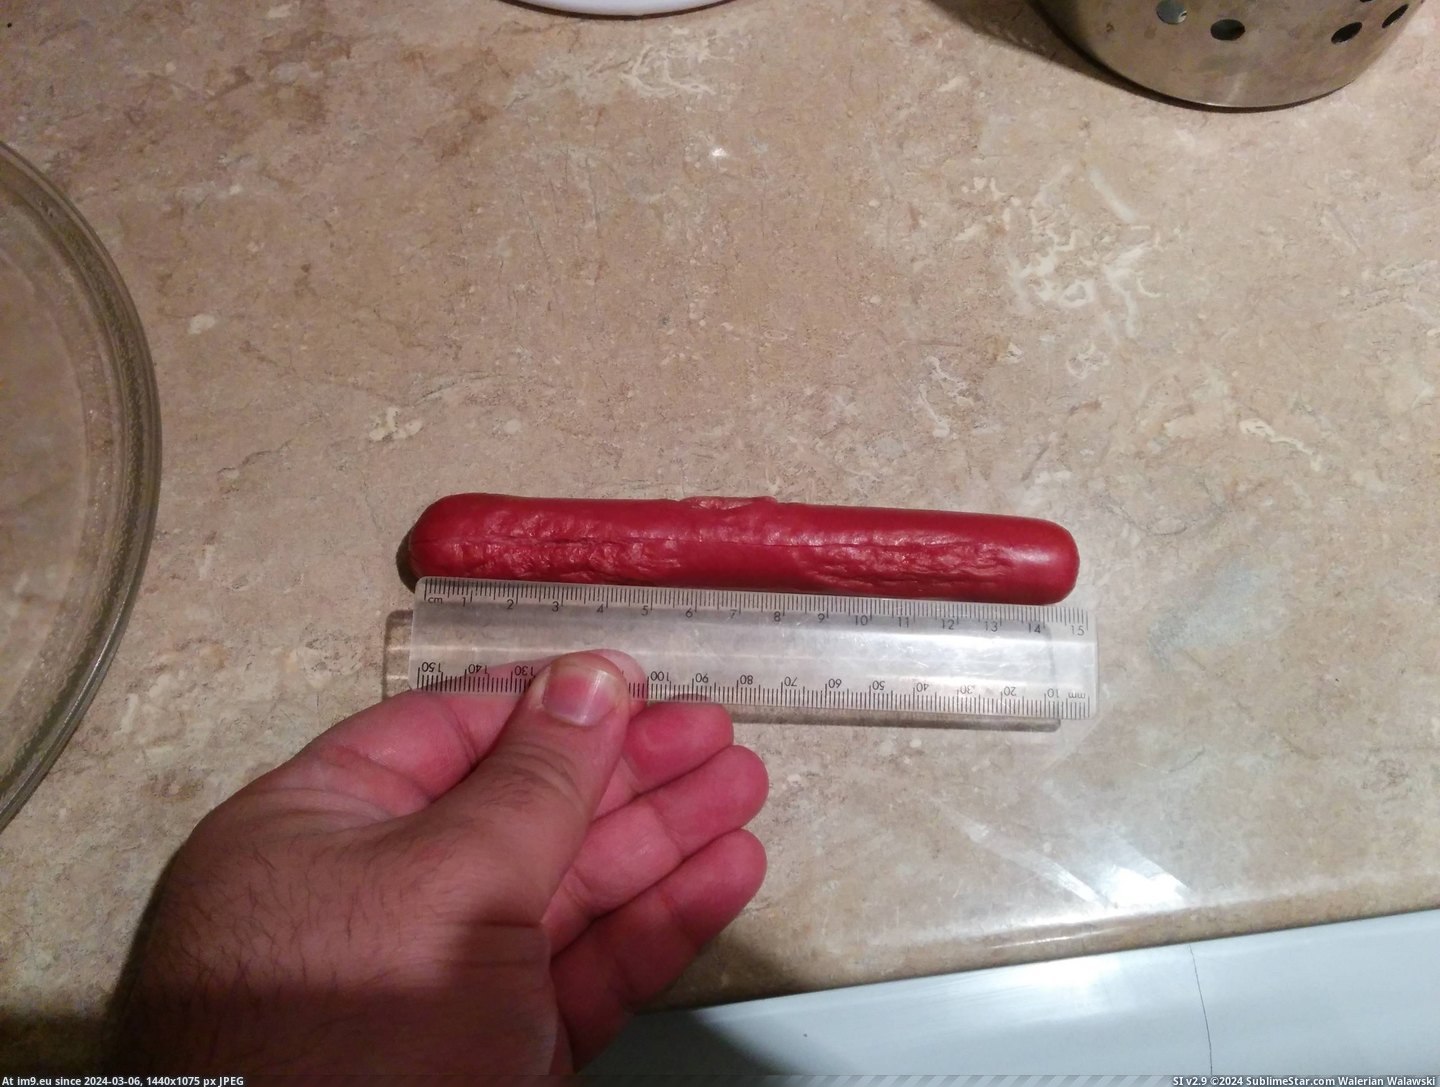 #Light #Speed #Calculating #Sausage #Microwave [Mildlyinteresting] Calculating the speed of light with a sausage (and a microwave) 1 Pic. (Изображение из альбом My r/MILDLYINTERESTING favs))